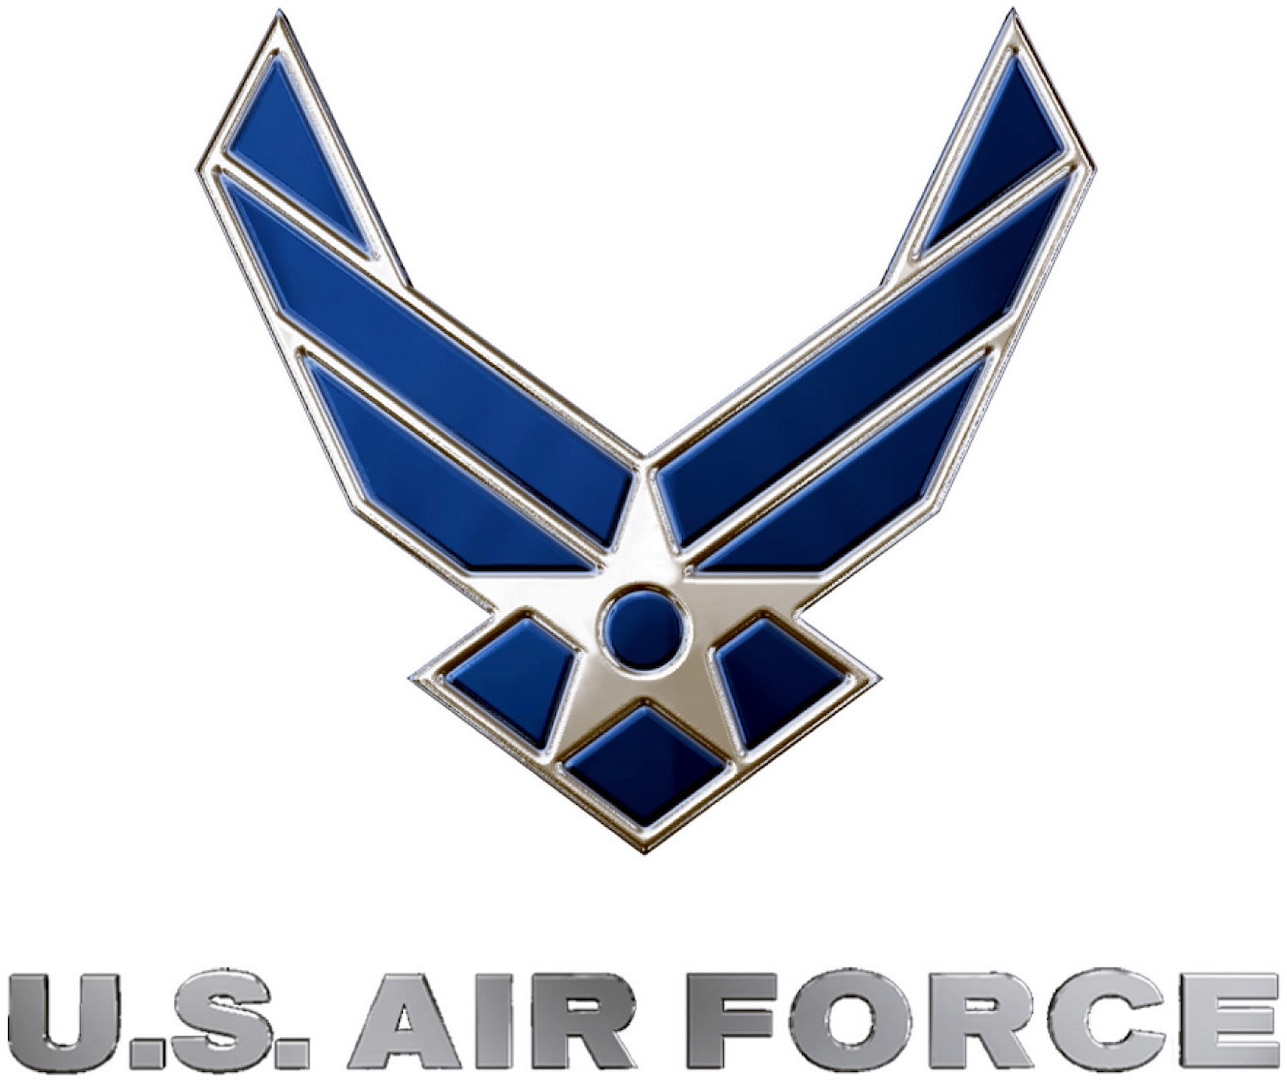 The Air Force announced it will make adjustments to the way the Air Force Form 709, Promotion Recommendation Form, will be filled out and used for Total Force officer promotion boards beginning in September 2019. The new policy will reduce the promotion recommendation narrative from nine lines to two and provide guidance for stratification and comments.